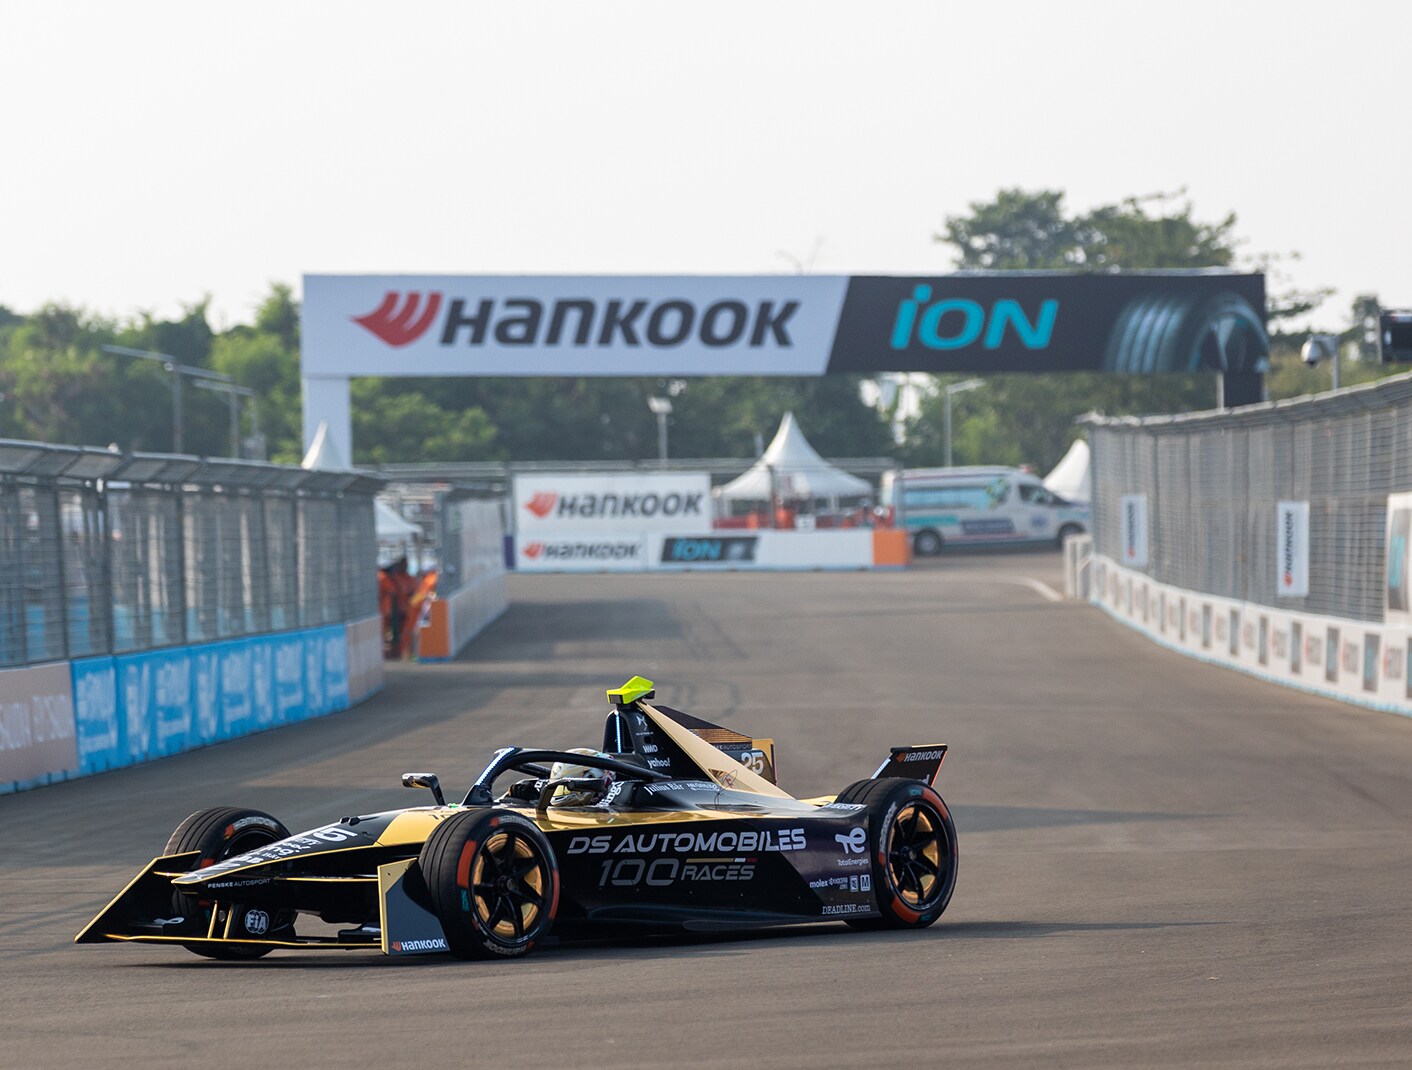 Germans Wehrlein and Günther win on the Hankook iON Race in the Indonesian heat